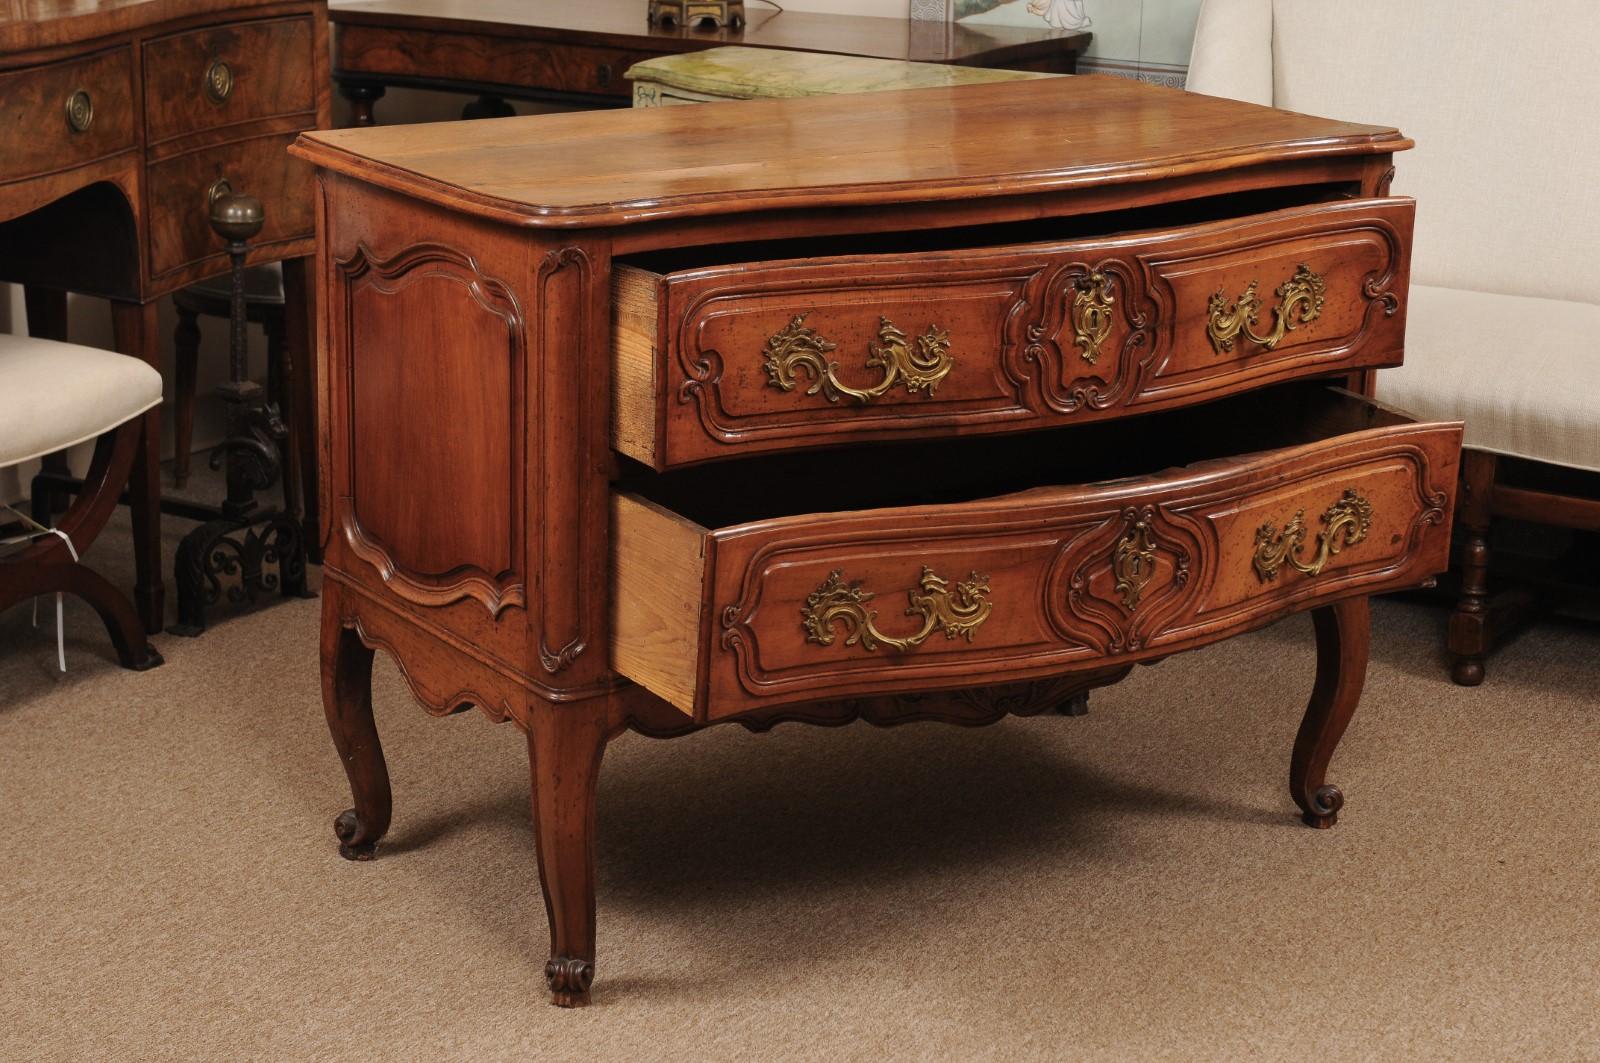 Early 18th Century French Regence Commode in Fruitwood with Carved Apron, Scroll Feet, & 2 Drawers.